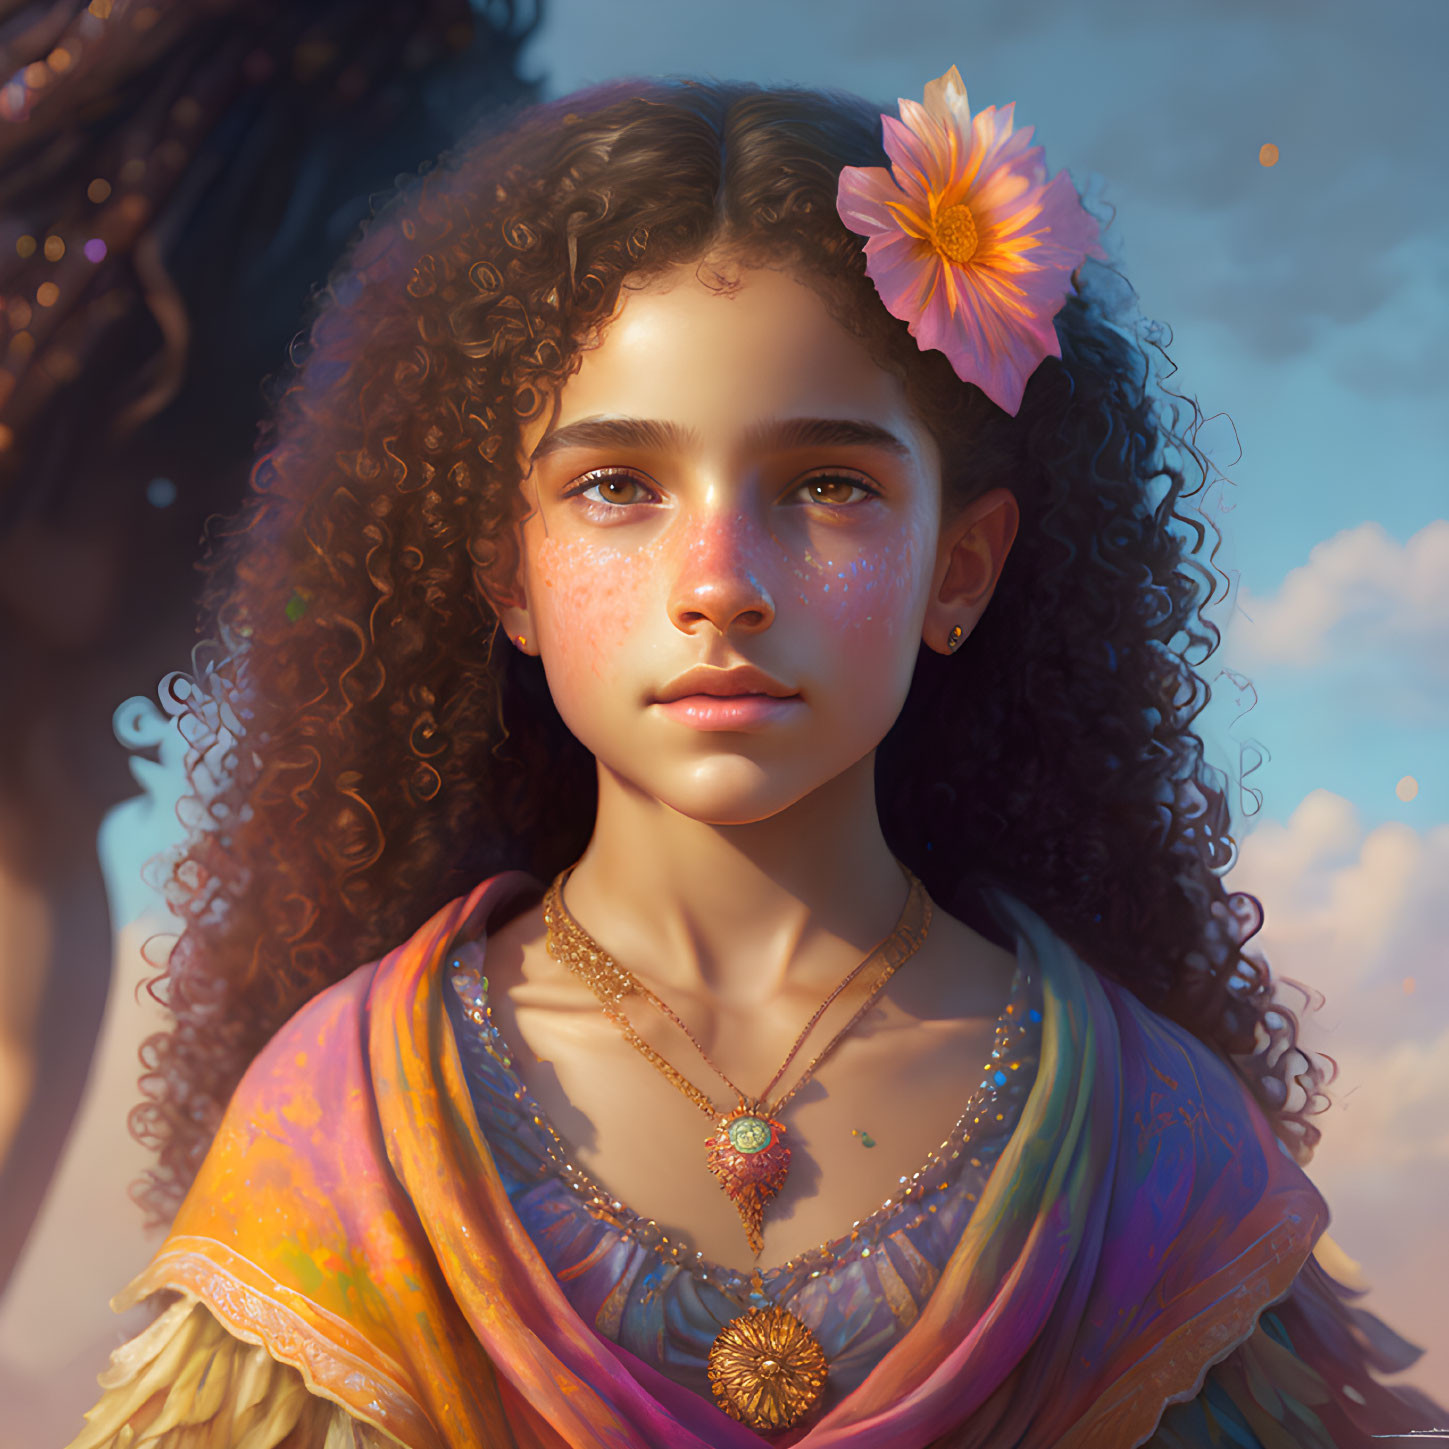 Young girl with curly hair, flower, colorful scarf, necklace, dreamy expression against cloudy sky